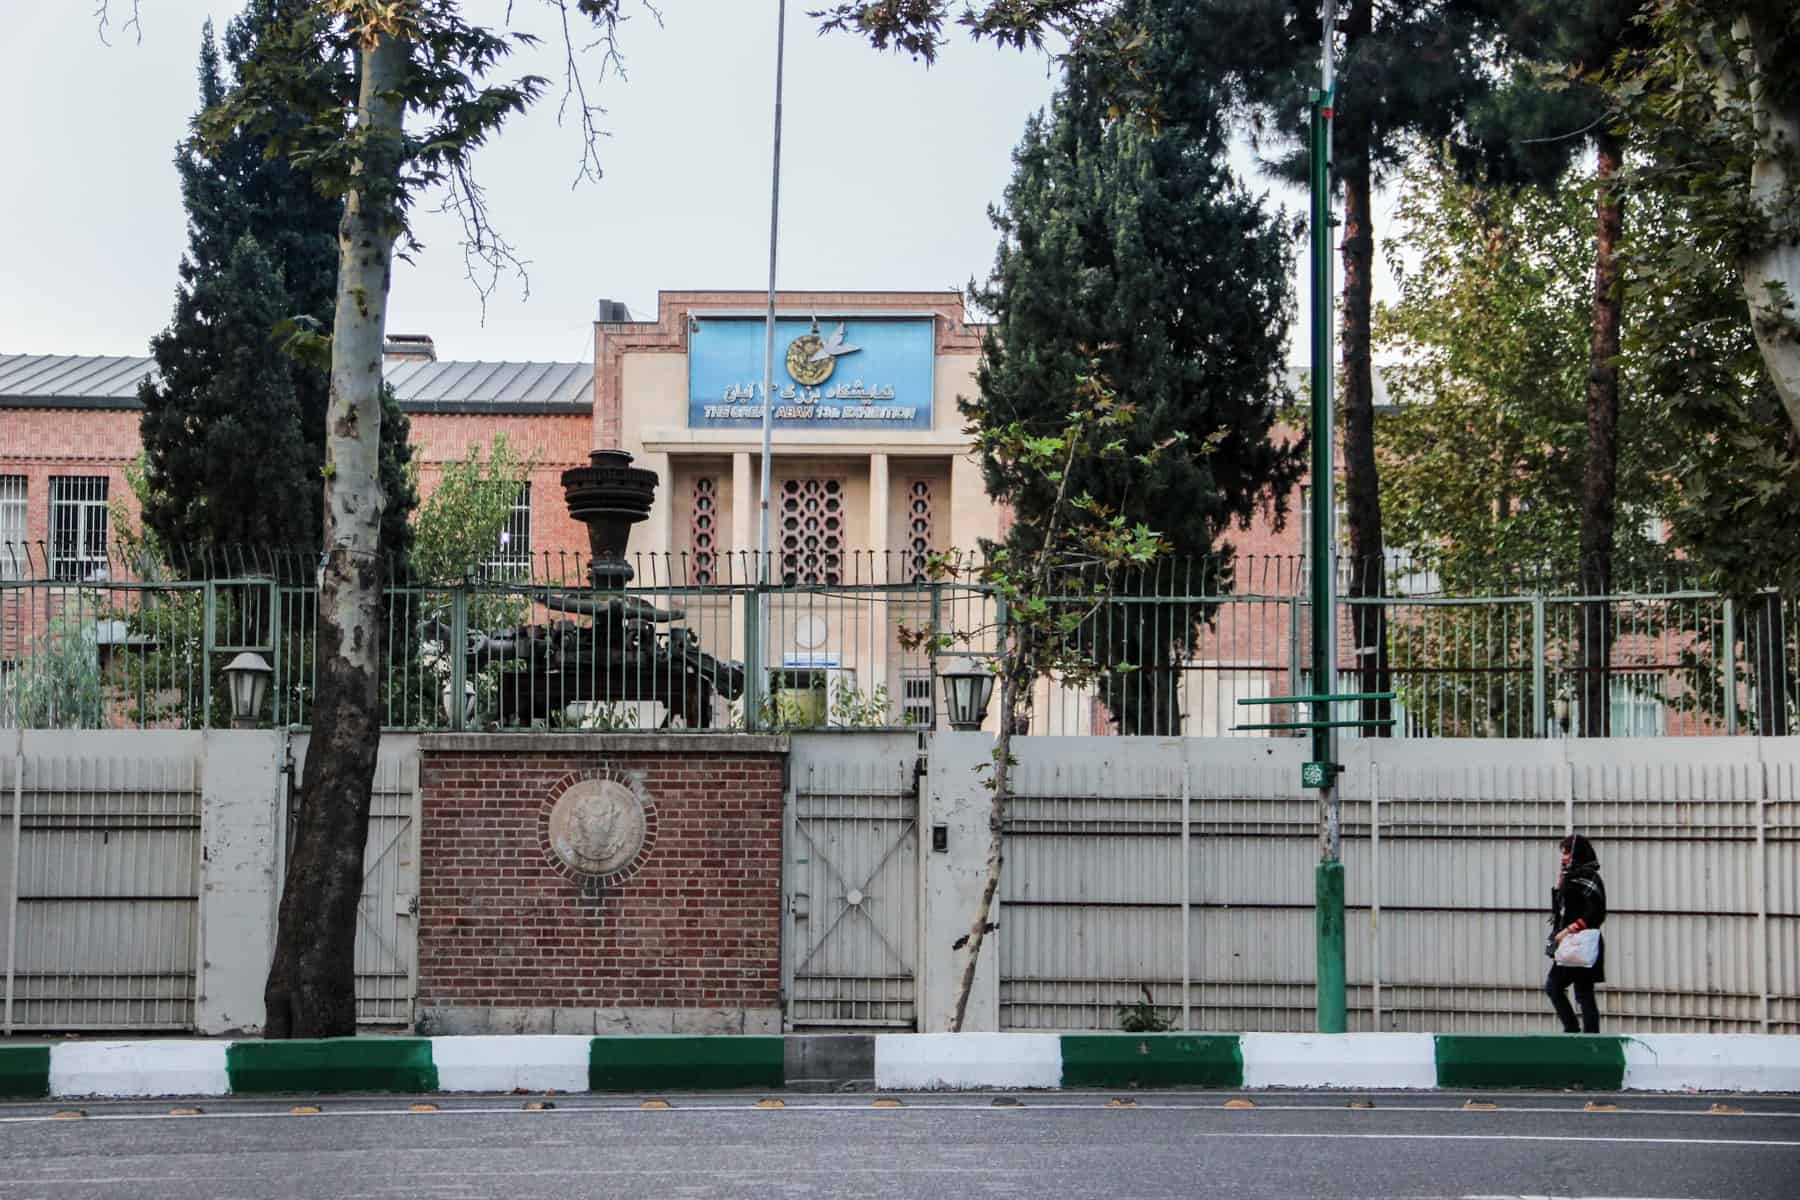 A woman in black clothing walks past the high green gate in front of the former US Embassy in Tehran, Iran.